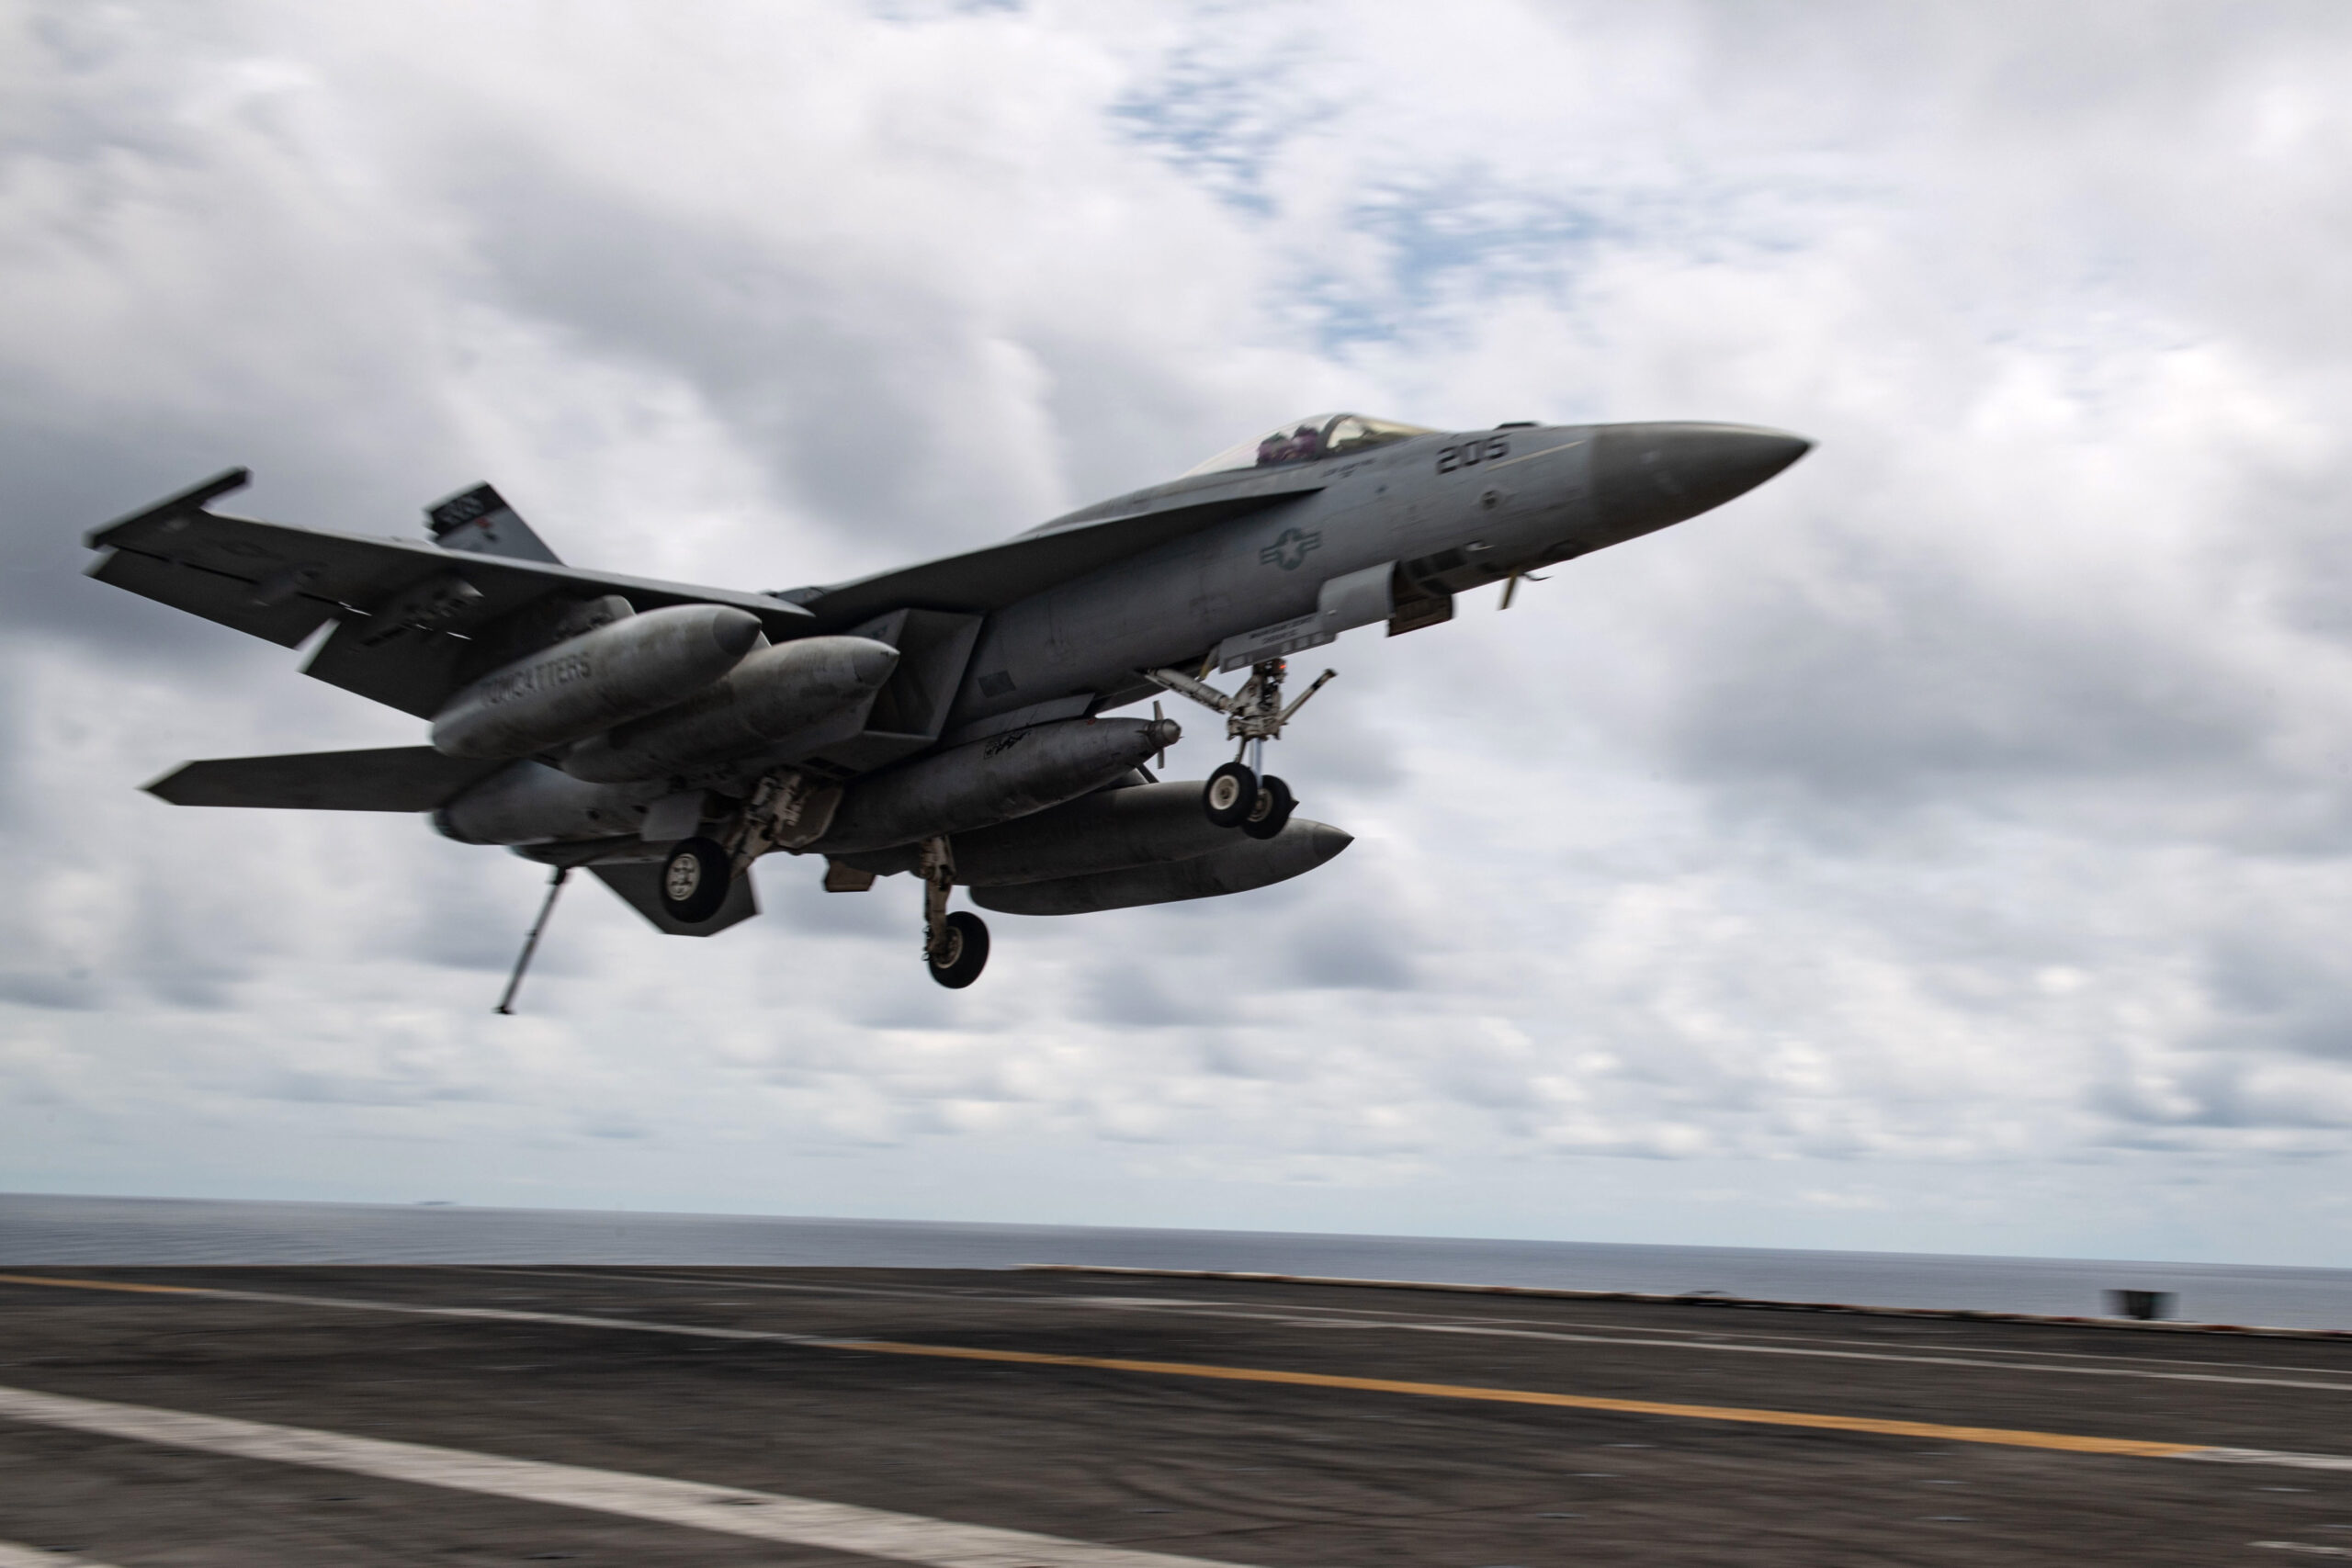 An F/A-18E Super Hornet, assigned to the “Tomcatters” of Strike Fighter Squadron (VFA) 31, approaches the flight deck of the aircraft carrier USS Theodore Roosevelt (CVN 71) April 5, 2021